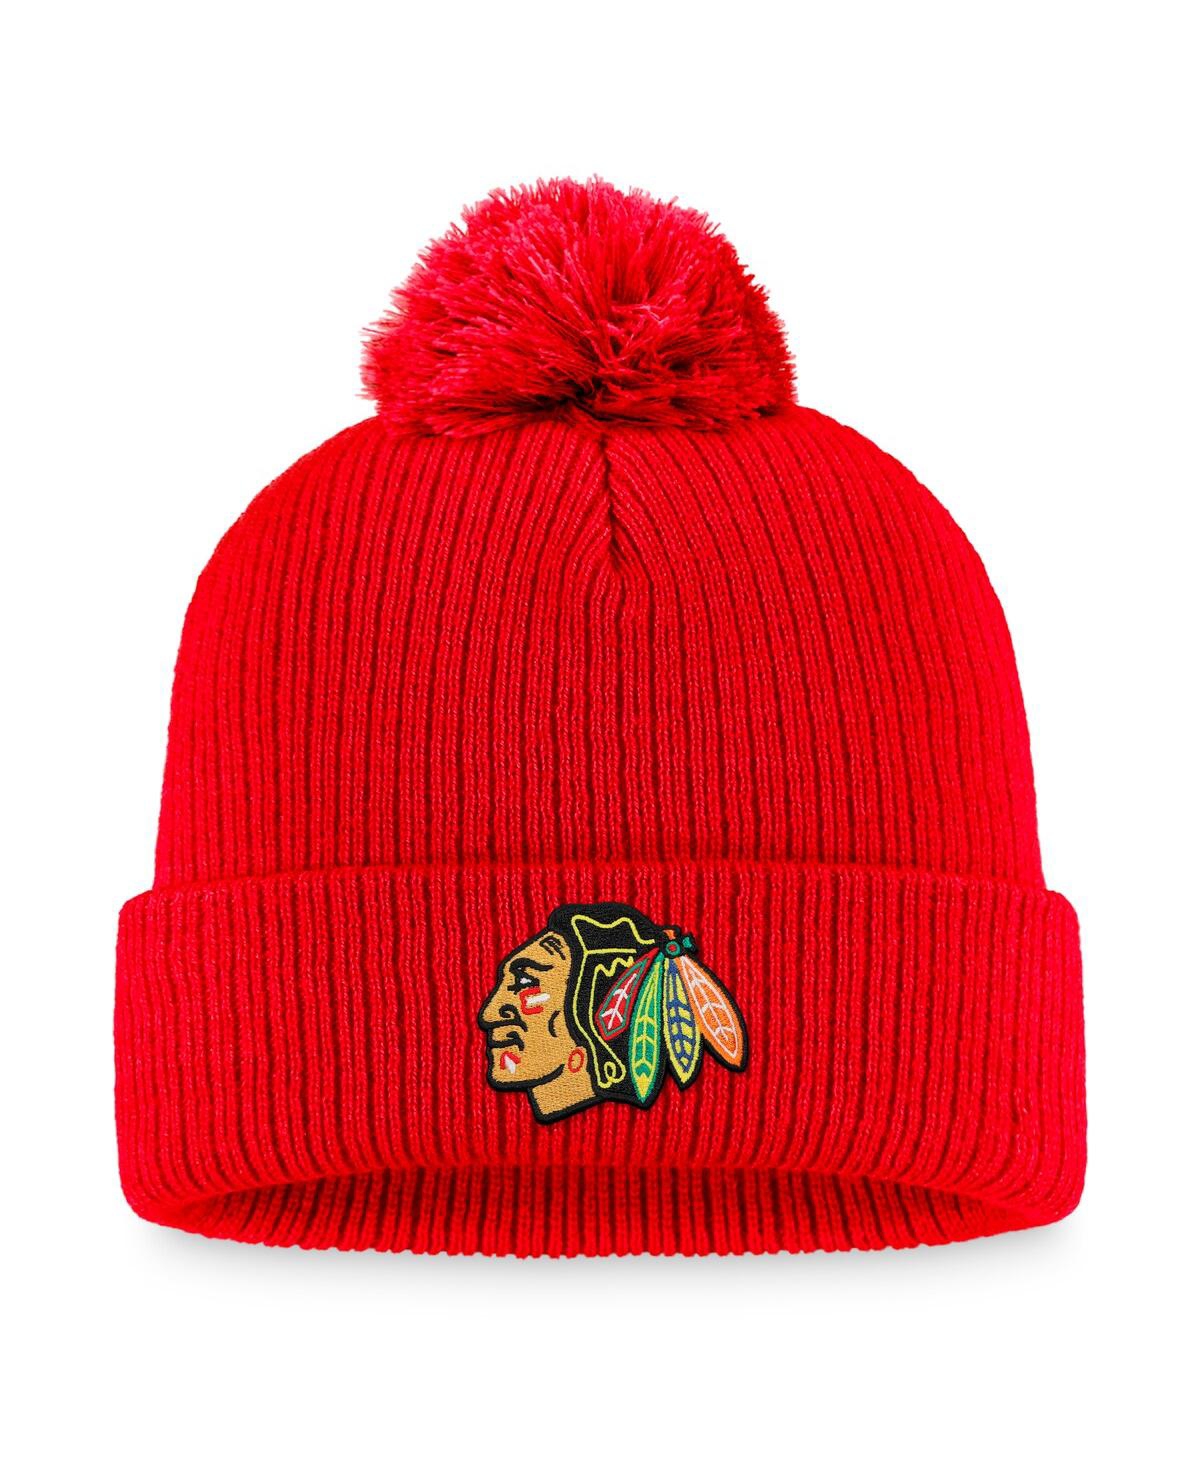 Men's Fanatics Red Chicago Blackhawks Core Primary Logo Cuffed Knit Hat with Pom - Red